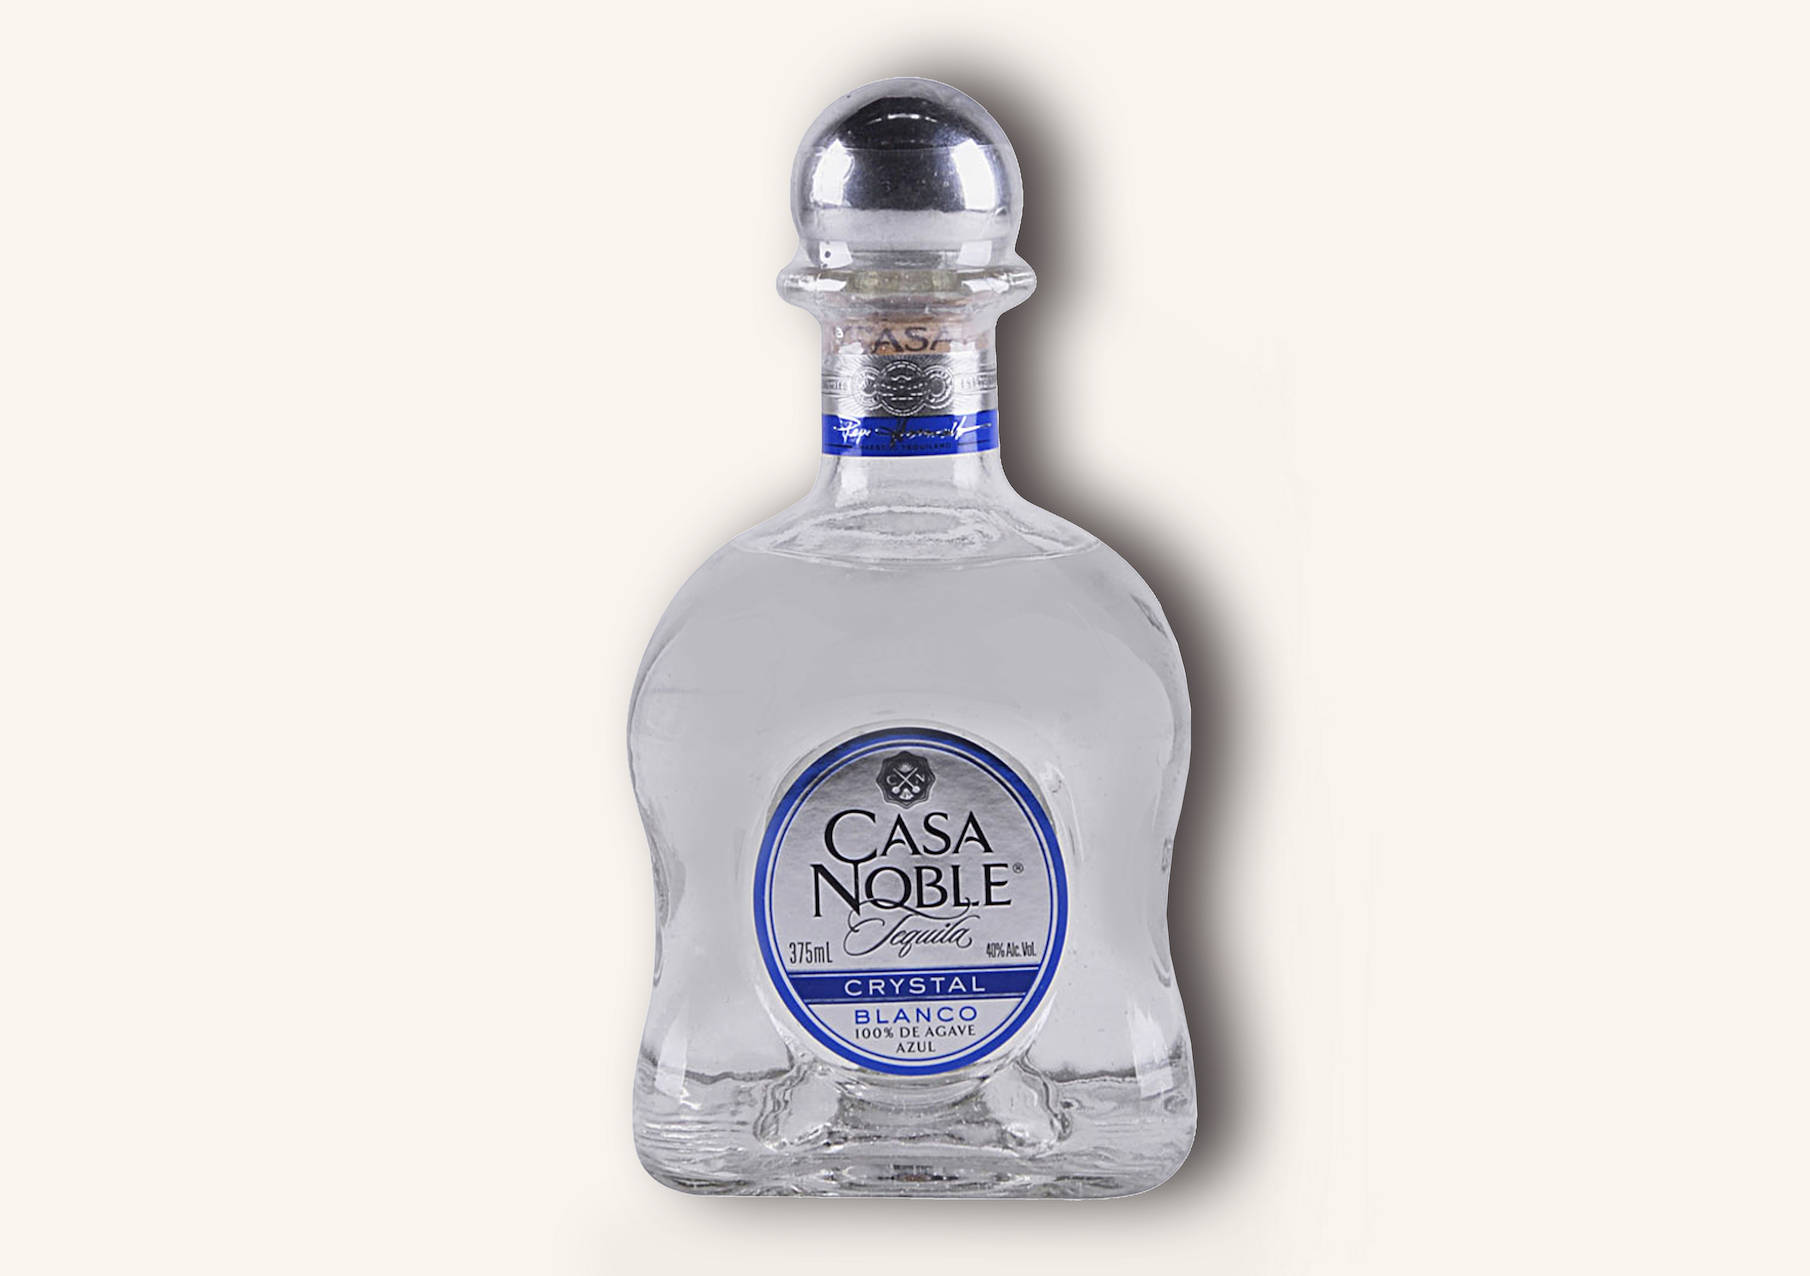 Casanoble Crystal Blanco Is A Brand Of Tequila, Not A Computer Or Mobile Wallpaper. Please Provide Specific Sentences Or Phrases Related To Computer Or Mobile Wallpapers That You Would Like Me To Translate. Fondo de pantalla